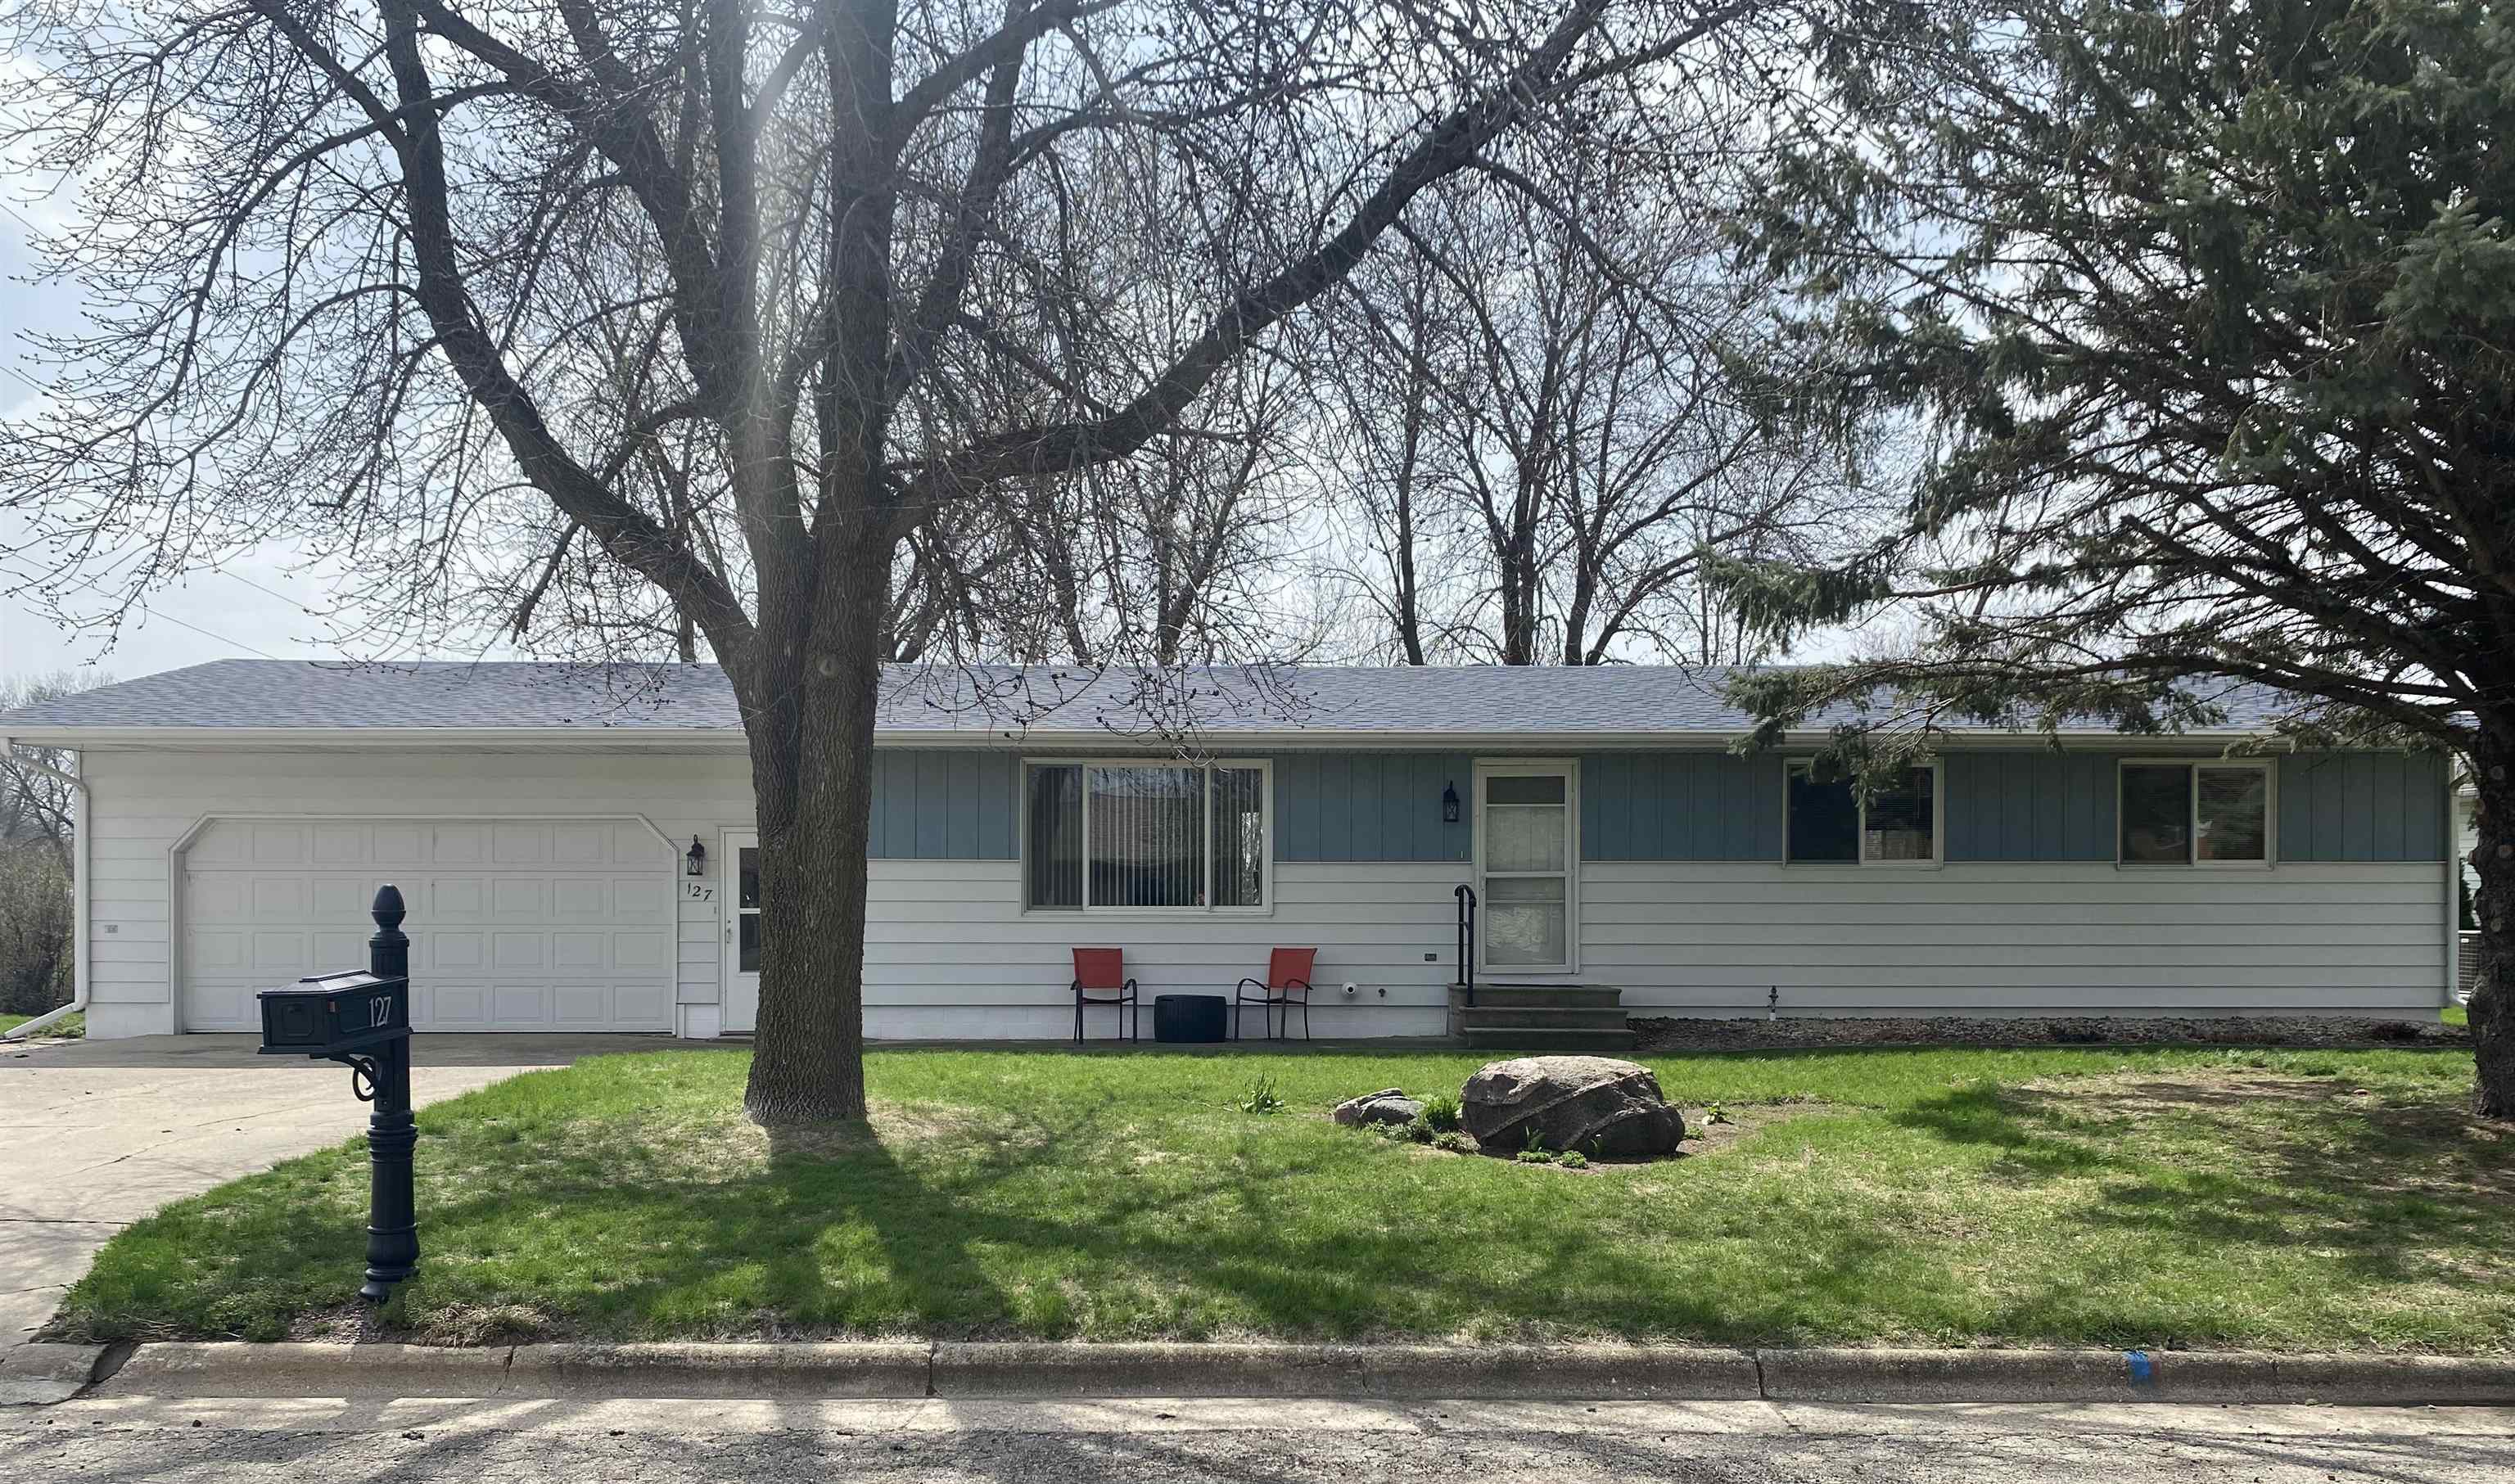 127 Golf Course Drive, Armstrong, IA 50514 